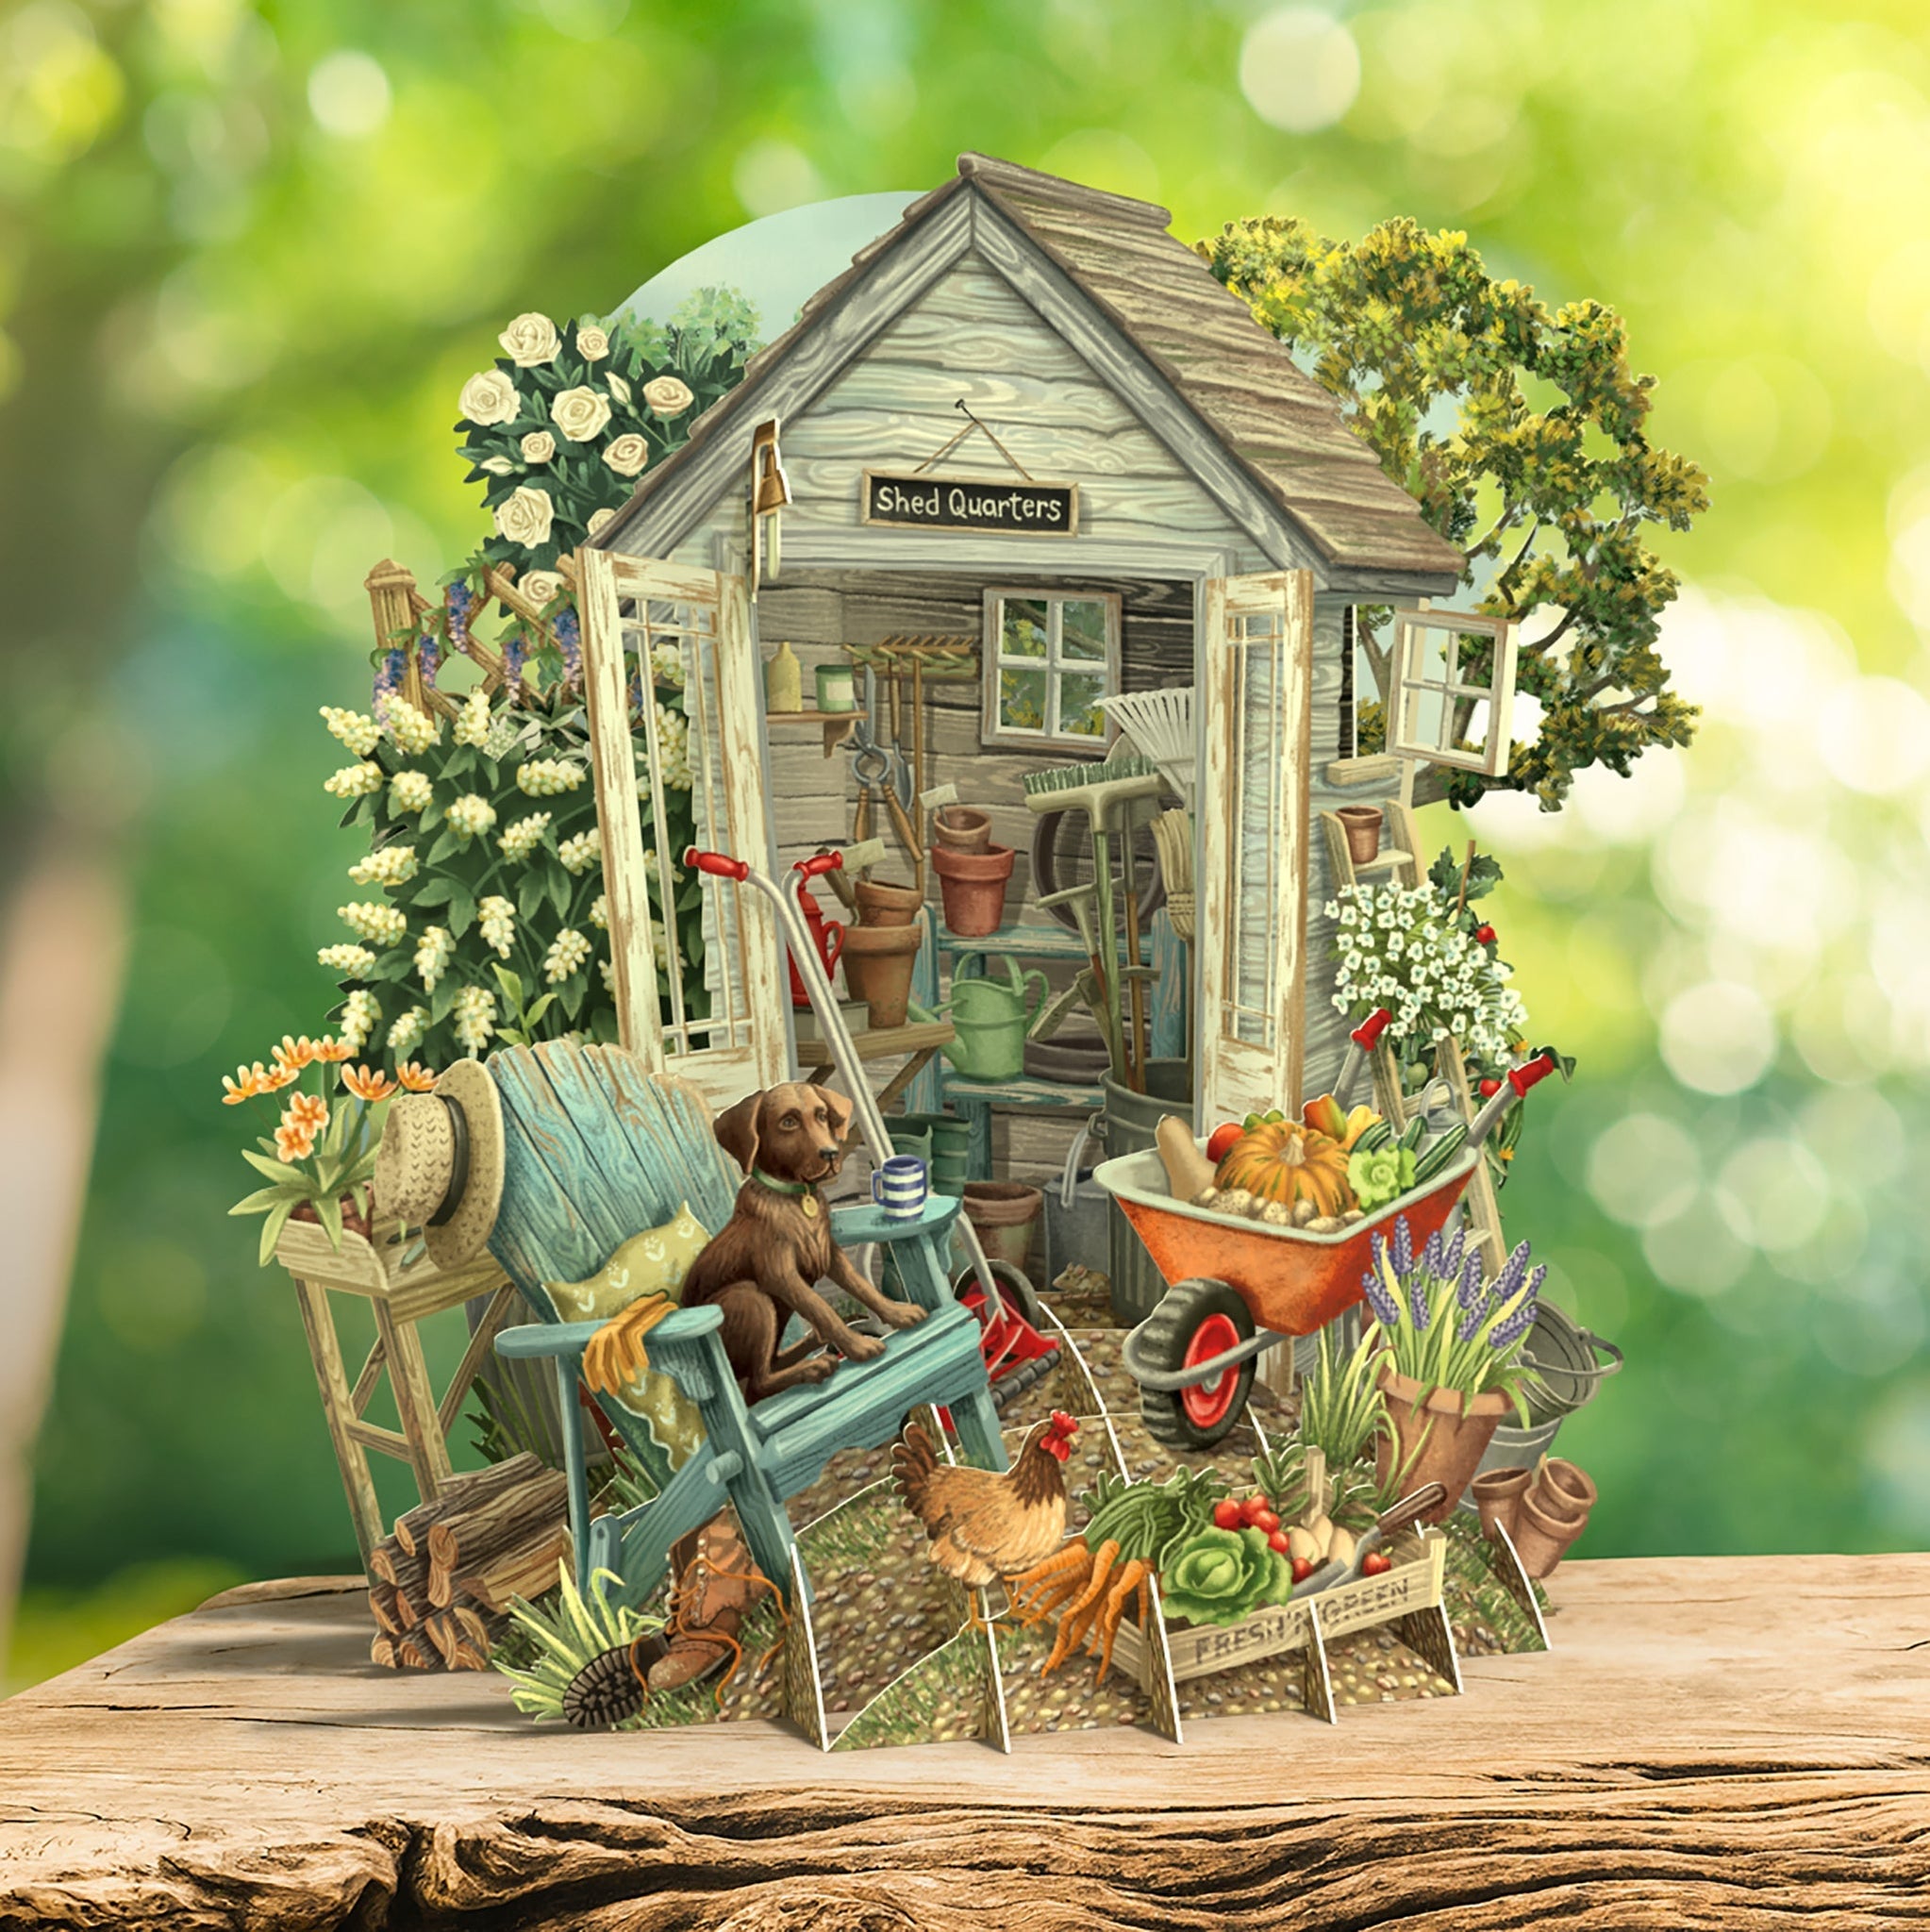 Shed Quarters 3D Pop Up Greetings Card